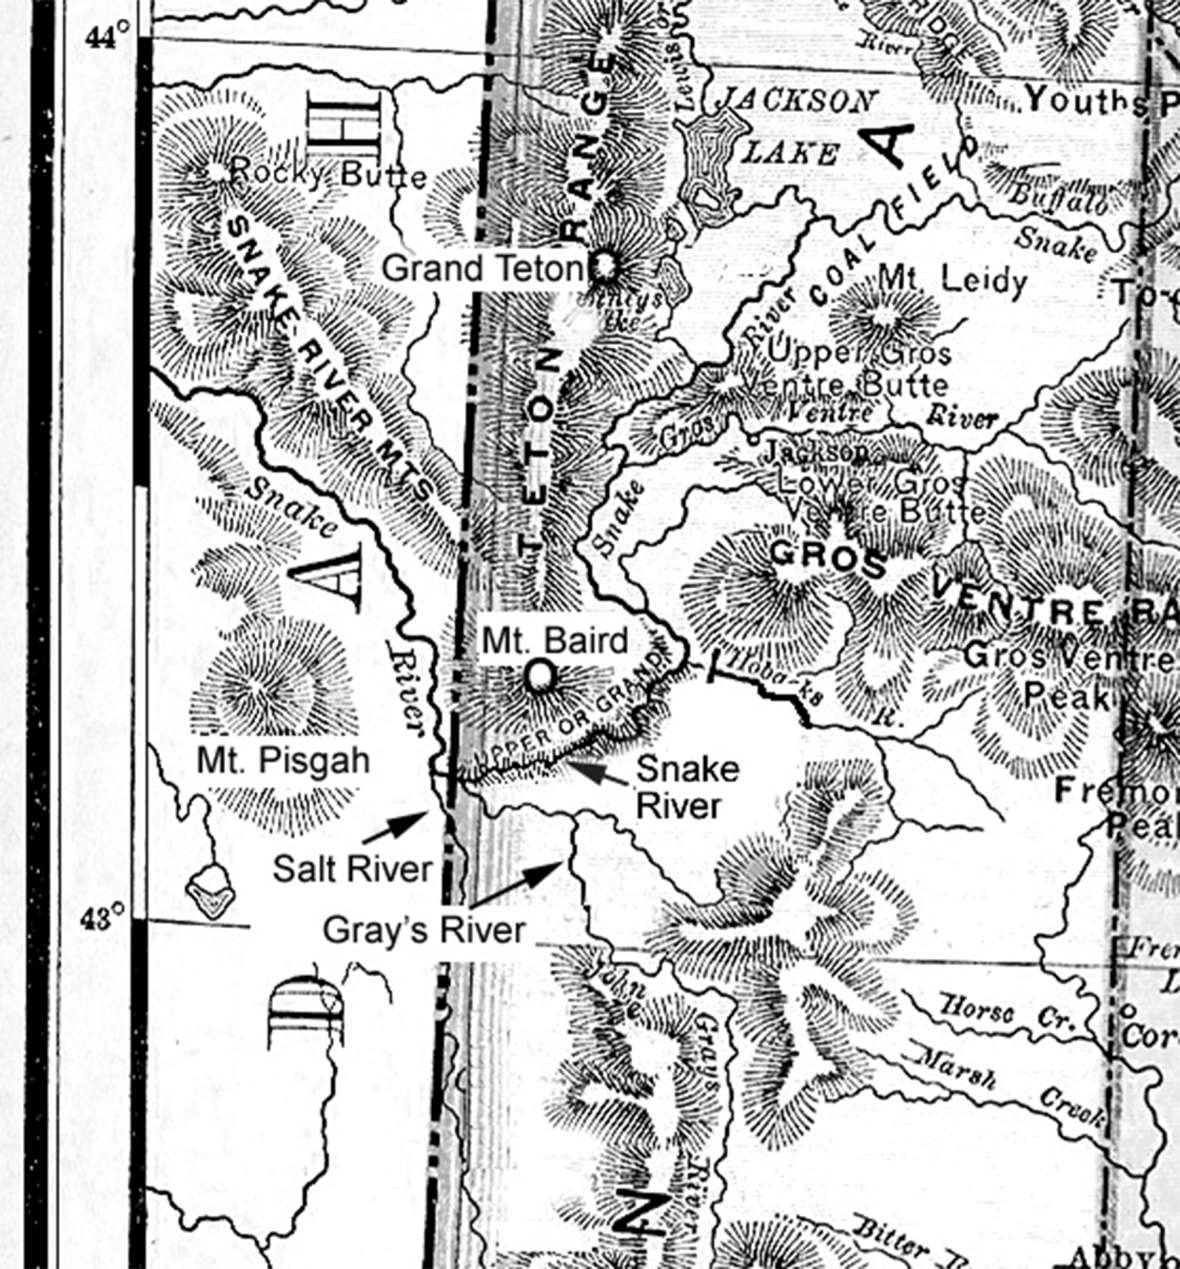 Part of an early map of Wyoming Territory showing the confluence of the Snake, Gray’s and Salt rivers near present Alpine, Wyo. south of Jackson, where the survey party had such a difficult time crossing the Snake Rier. Author’s collection.